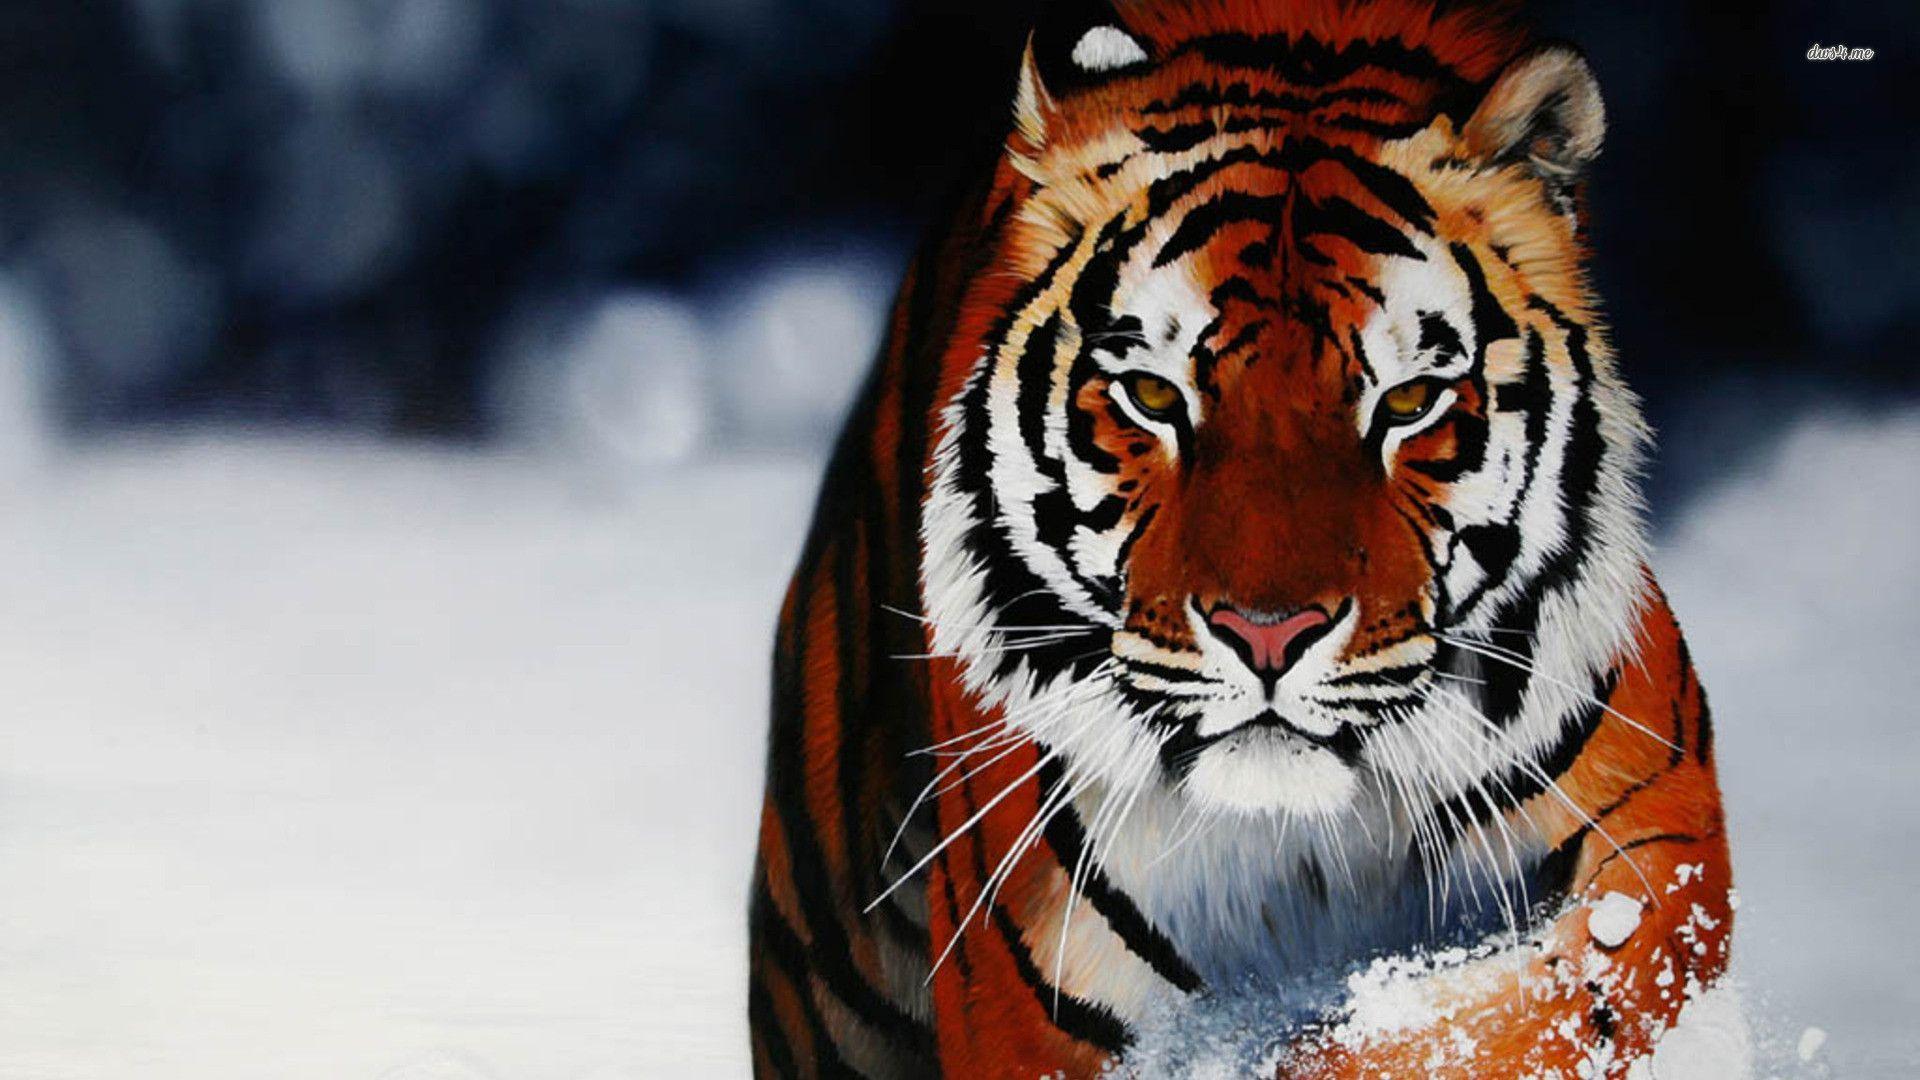 bengal tigers wallpaper Search Engine